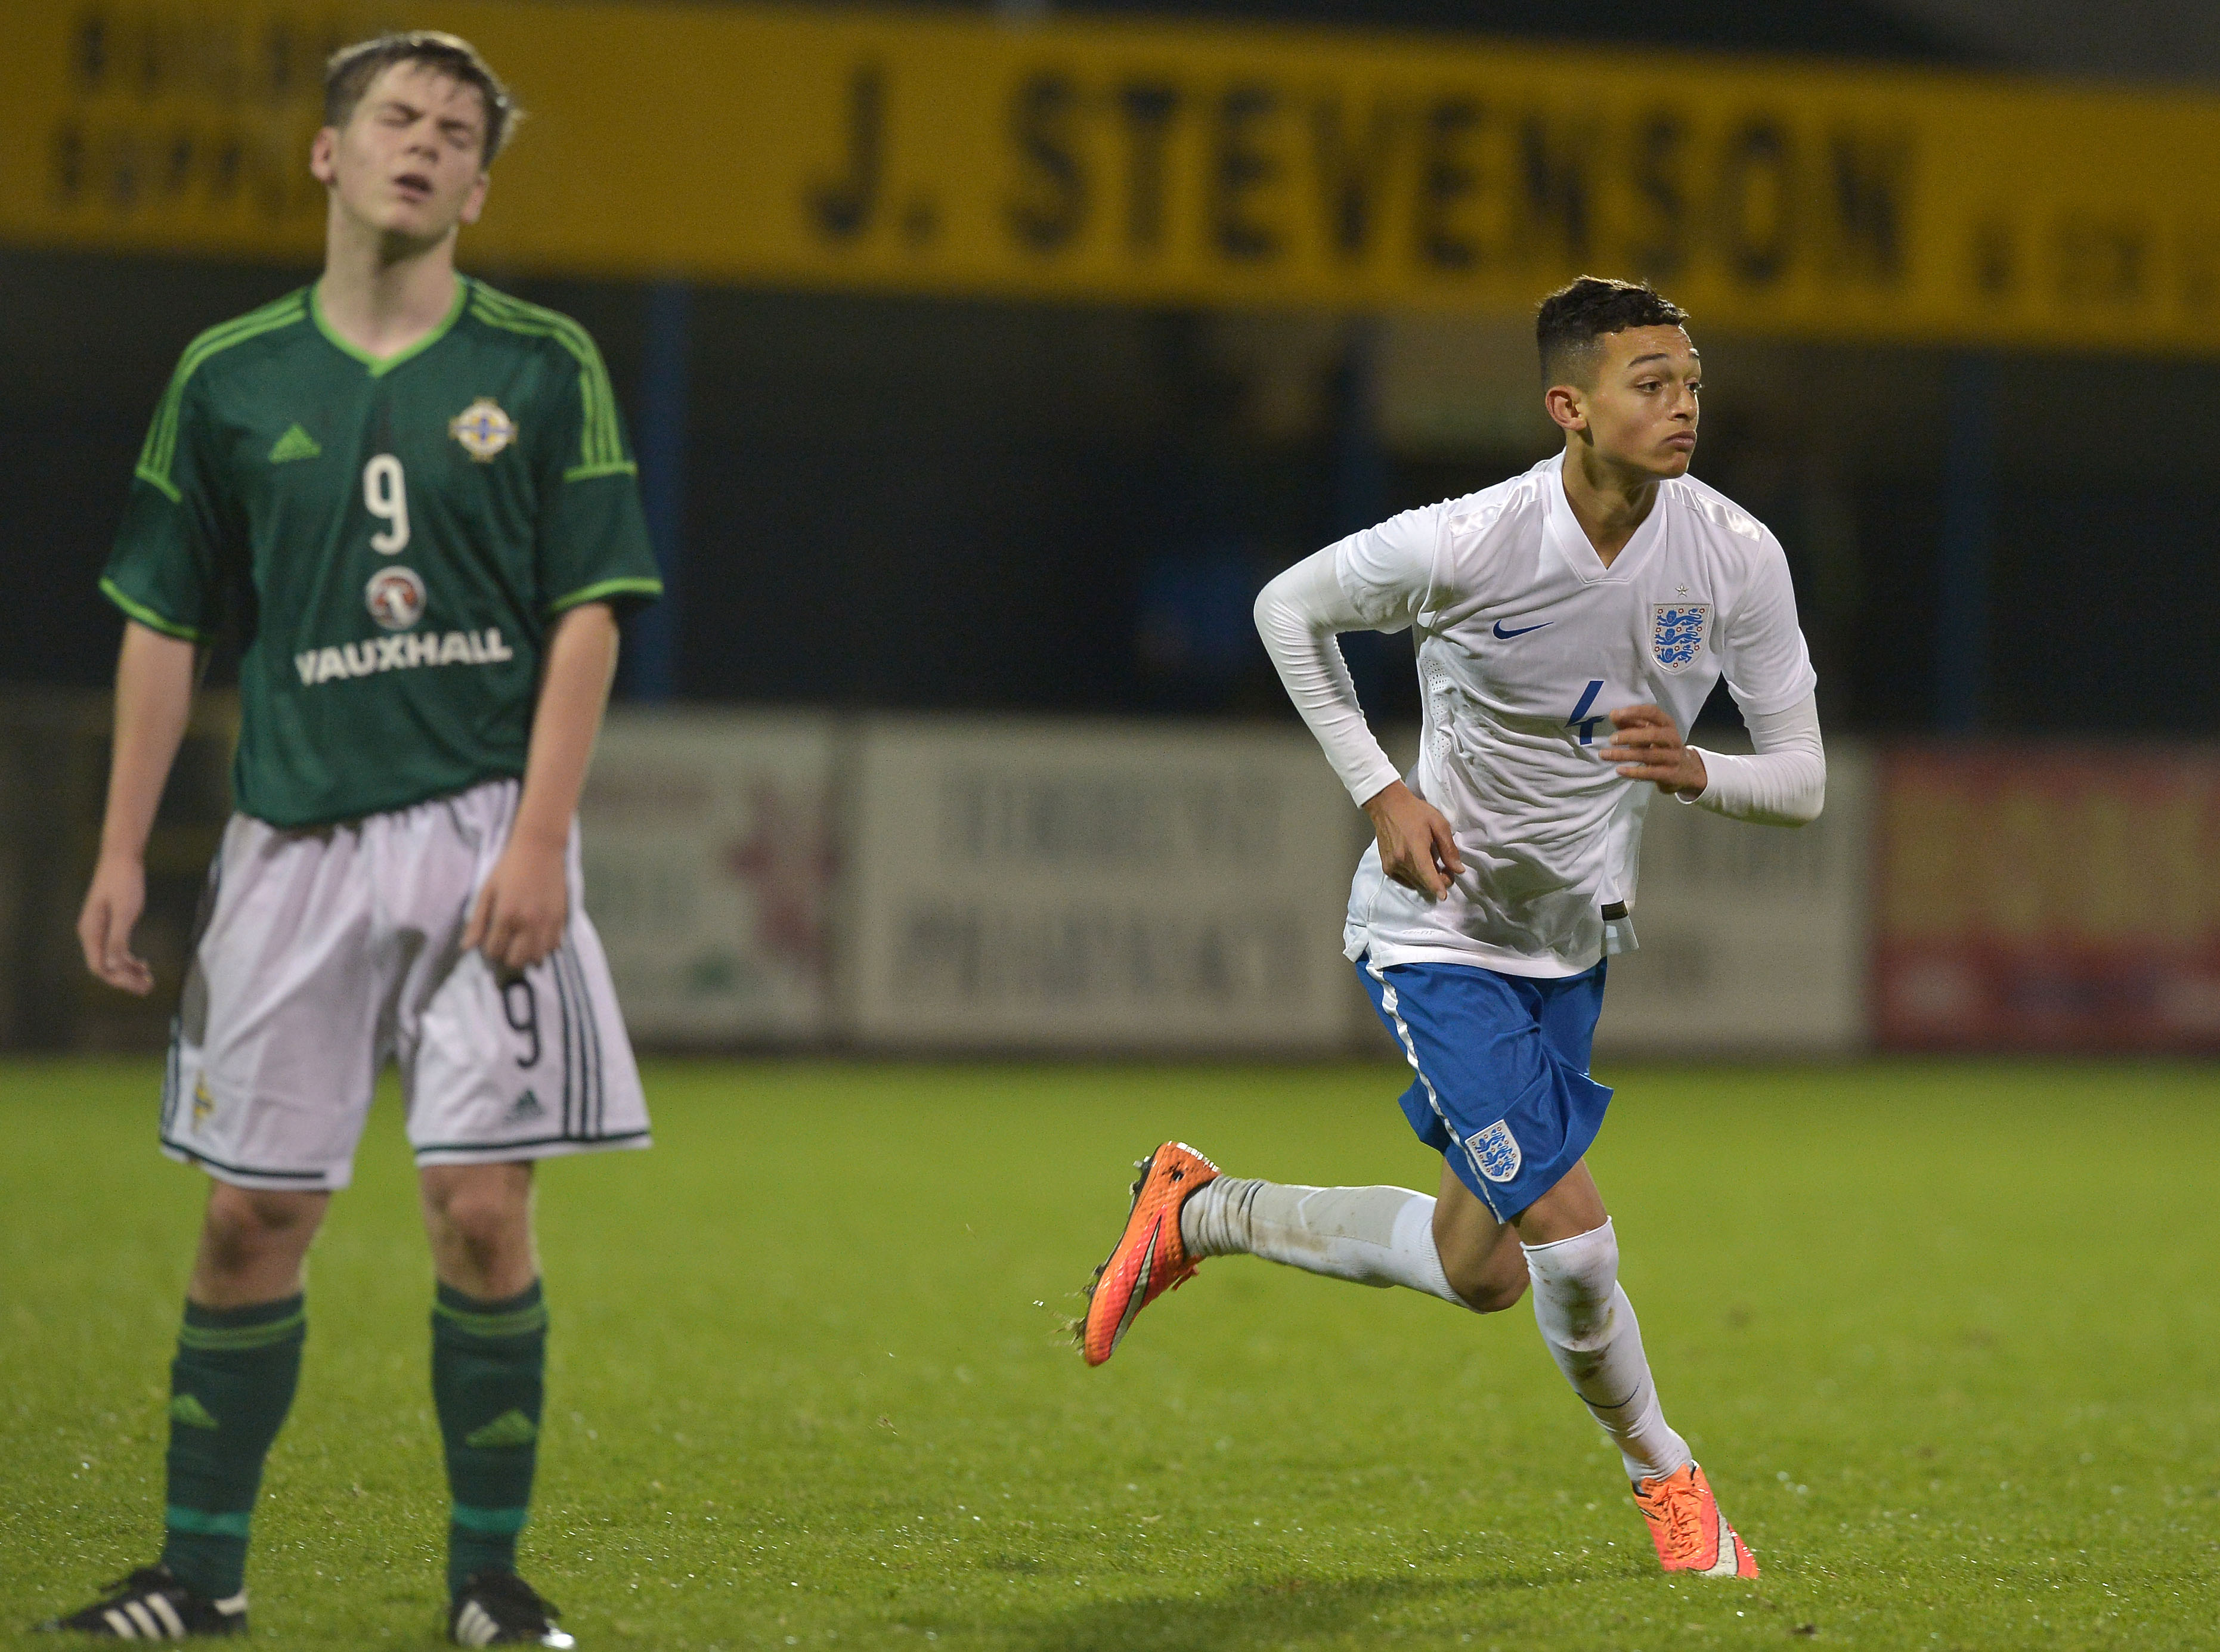 DUNGANNON, NORTHERN IRELAND - NOVEMBER 07:  Andre Dozzell of England (R) celebrates scoring the opening goal during this evenings Sky Sports Victory Shield U16 international game between Northern Ireland and England at Stangmore Park on November 7, 2014 in Dungannon, Northern Ireland.  (Photo by Charles McQuillan/Getty Images)